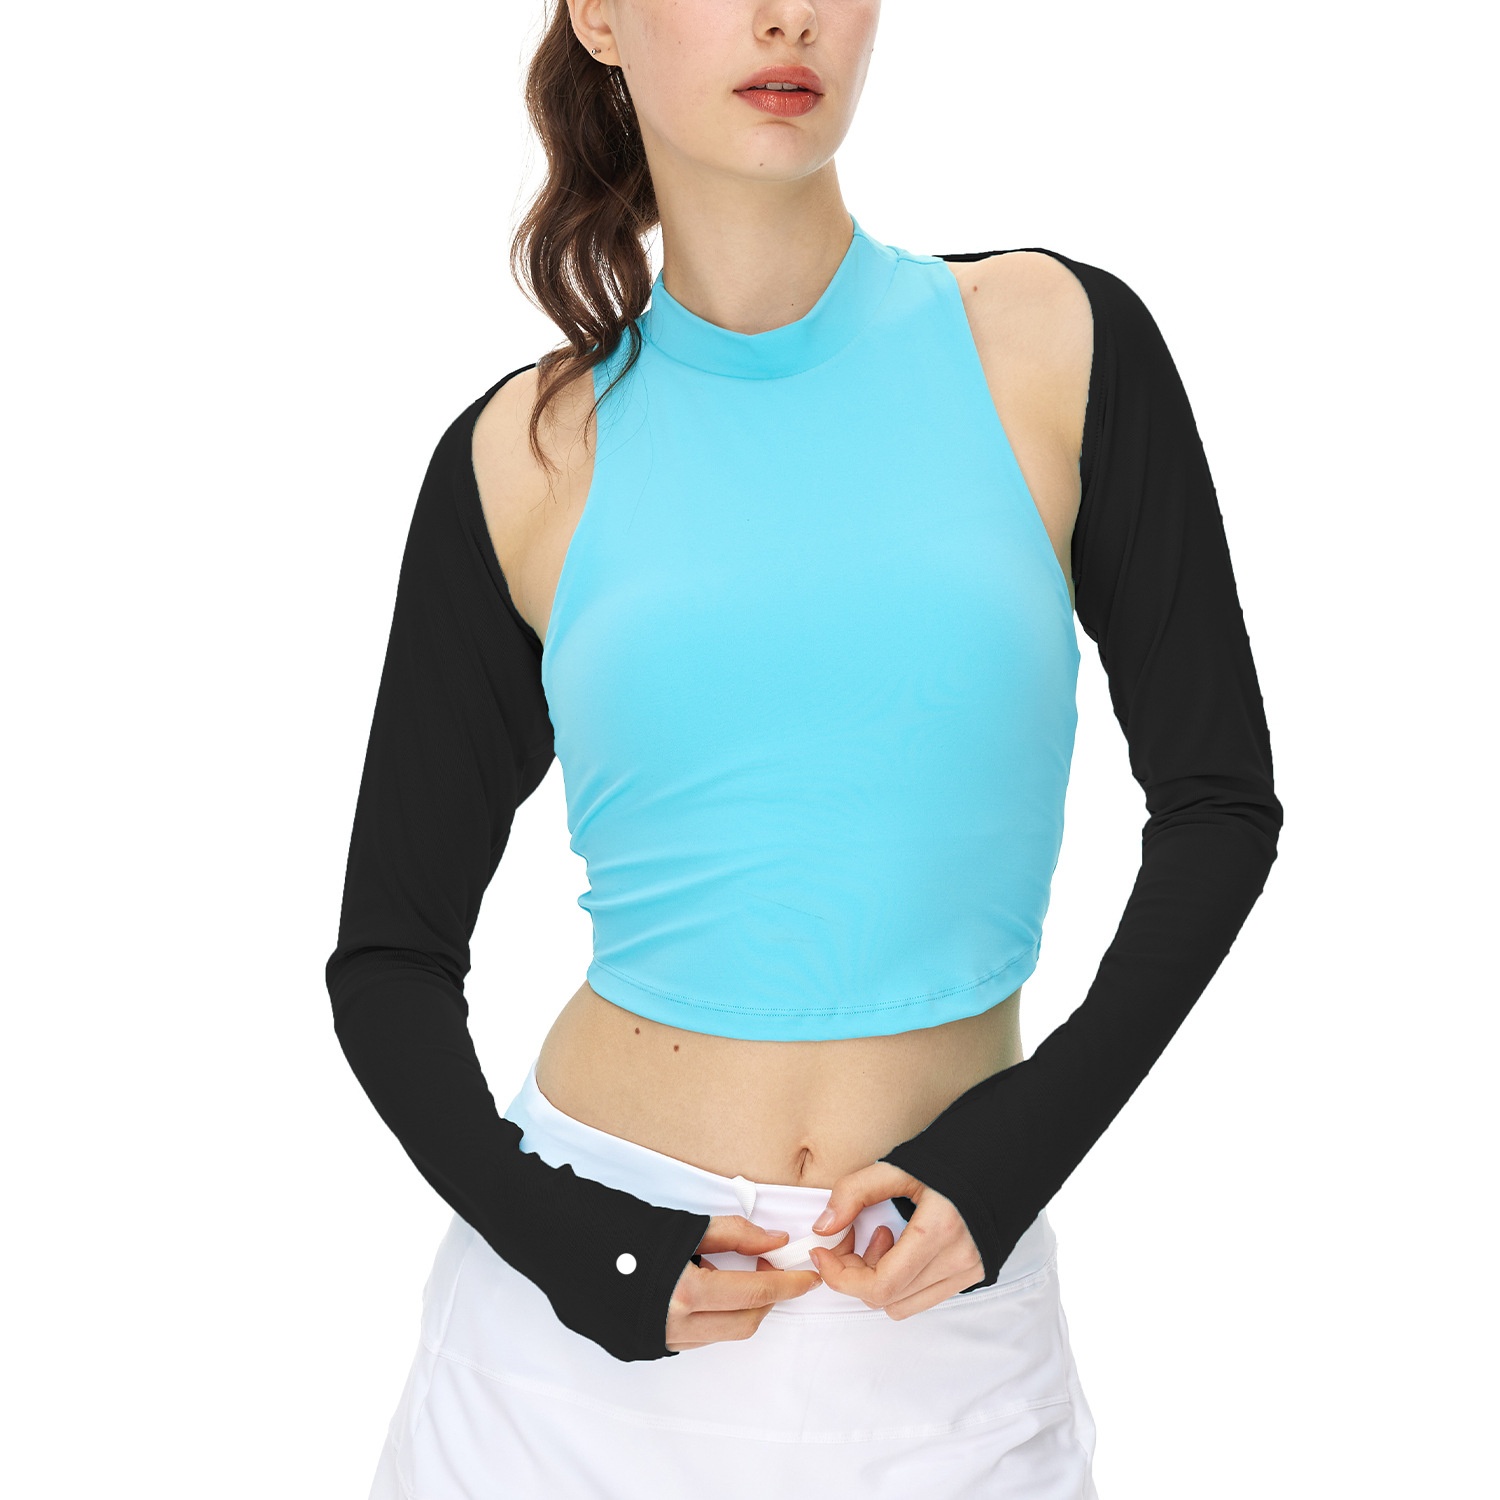 lu Women Yoga Long Sleeve Shirt Sports Crop Top Outfit Screw Thread Wicking High Elastic Fitness Workout Fashion Tees Tops BFT1022